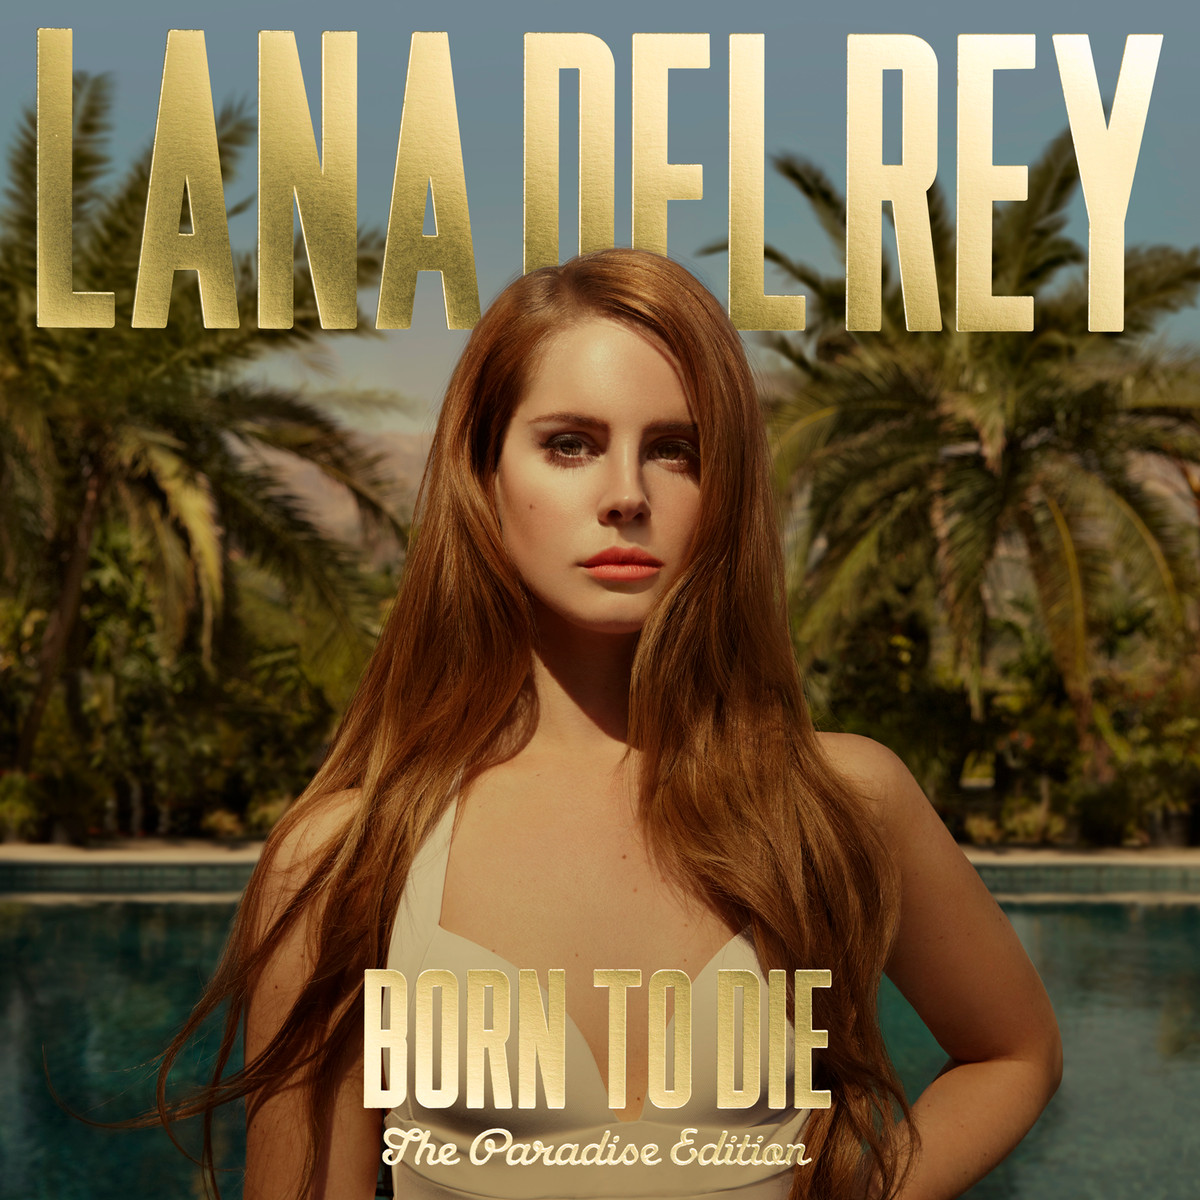 Lana-Del-Rey-Born-To-Die-Paradise-Edition-1500x1500-2012.png